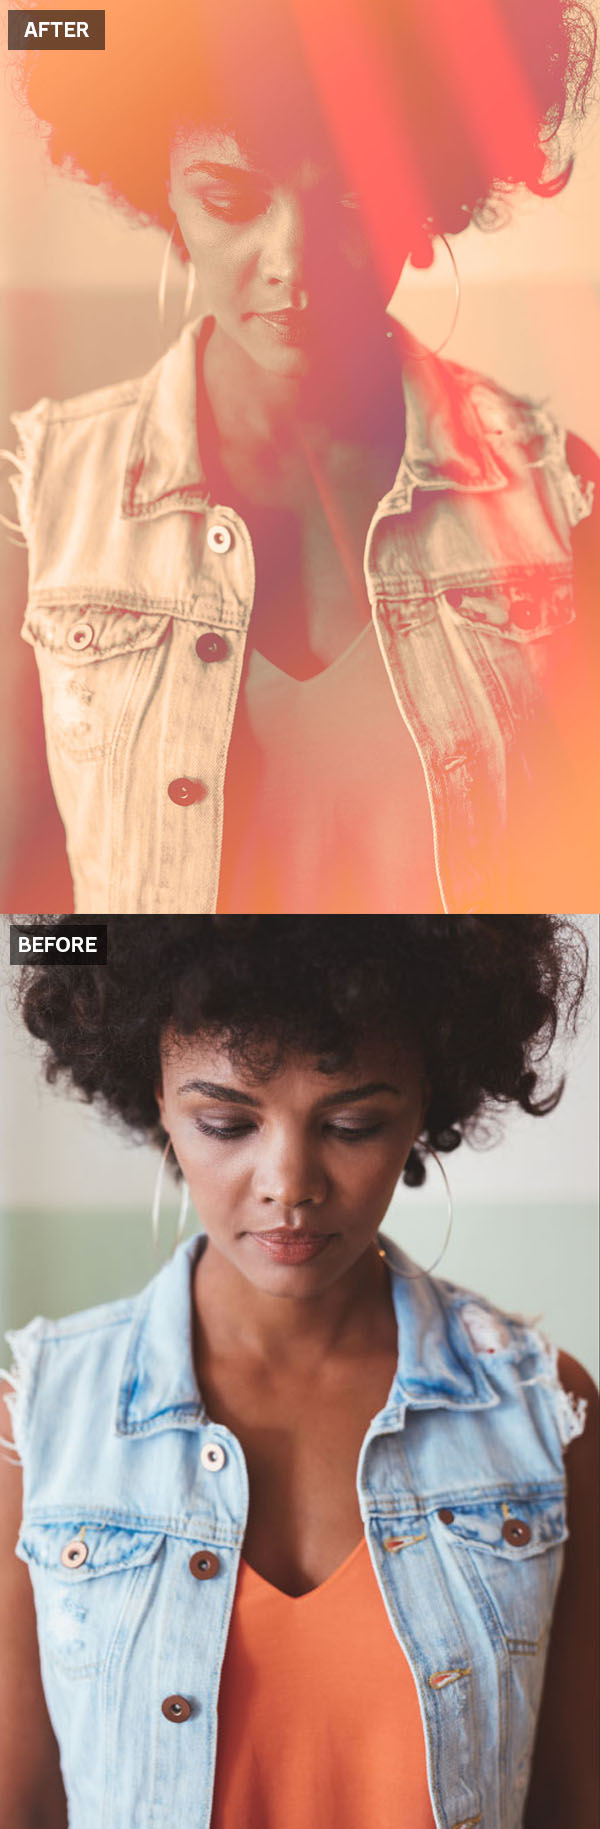 How to Create a Light Leak Photoshop Color Effect